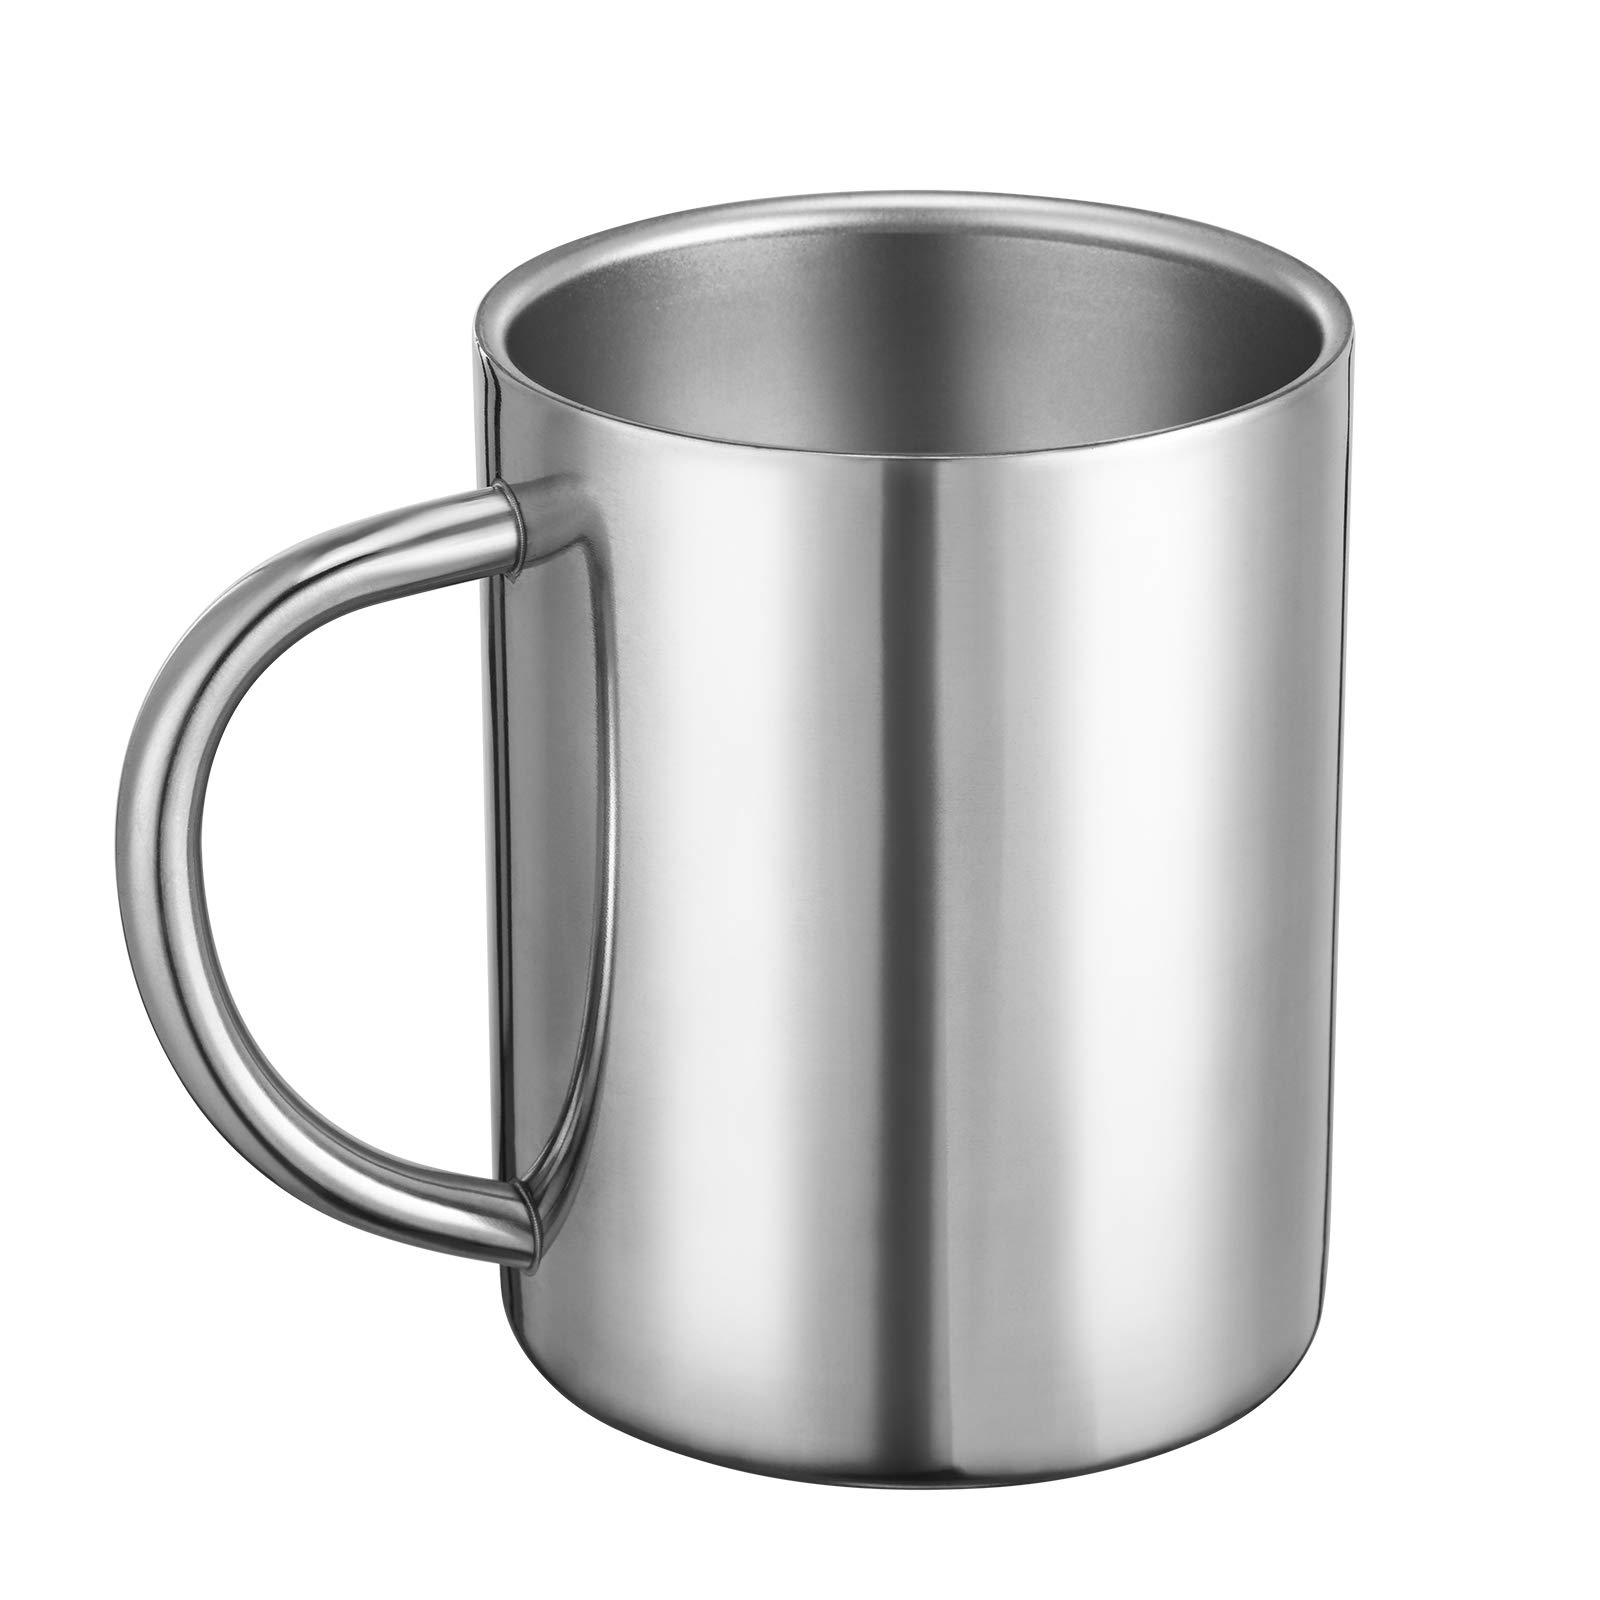 Stainless Steel Mug, Double Walled Mugs Metal Camping Coffee Mug Insulated  Tea Cup with Handle and Lid for Camping, Outdoors (S)